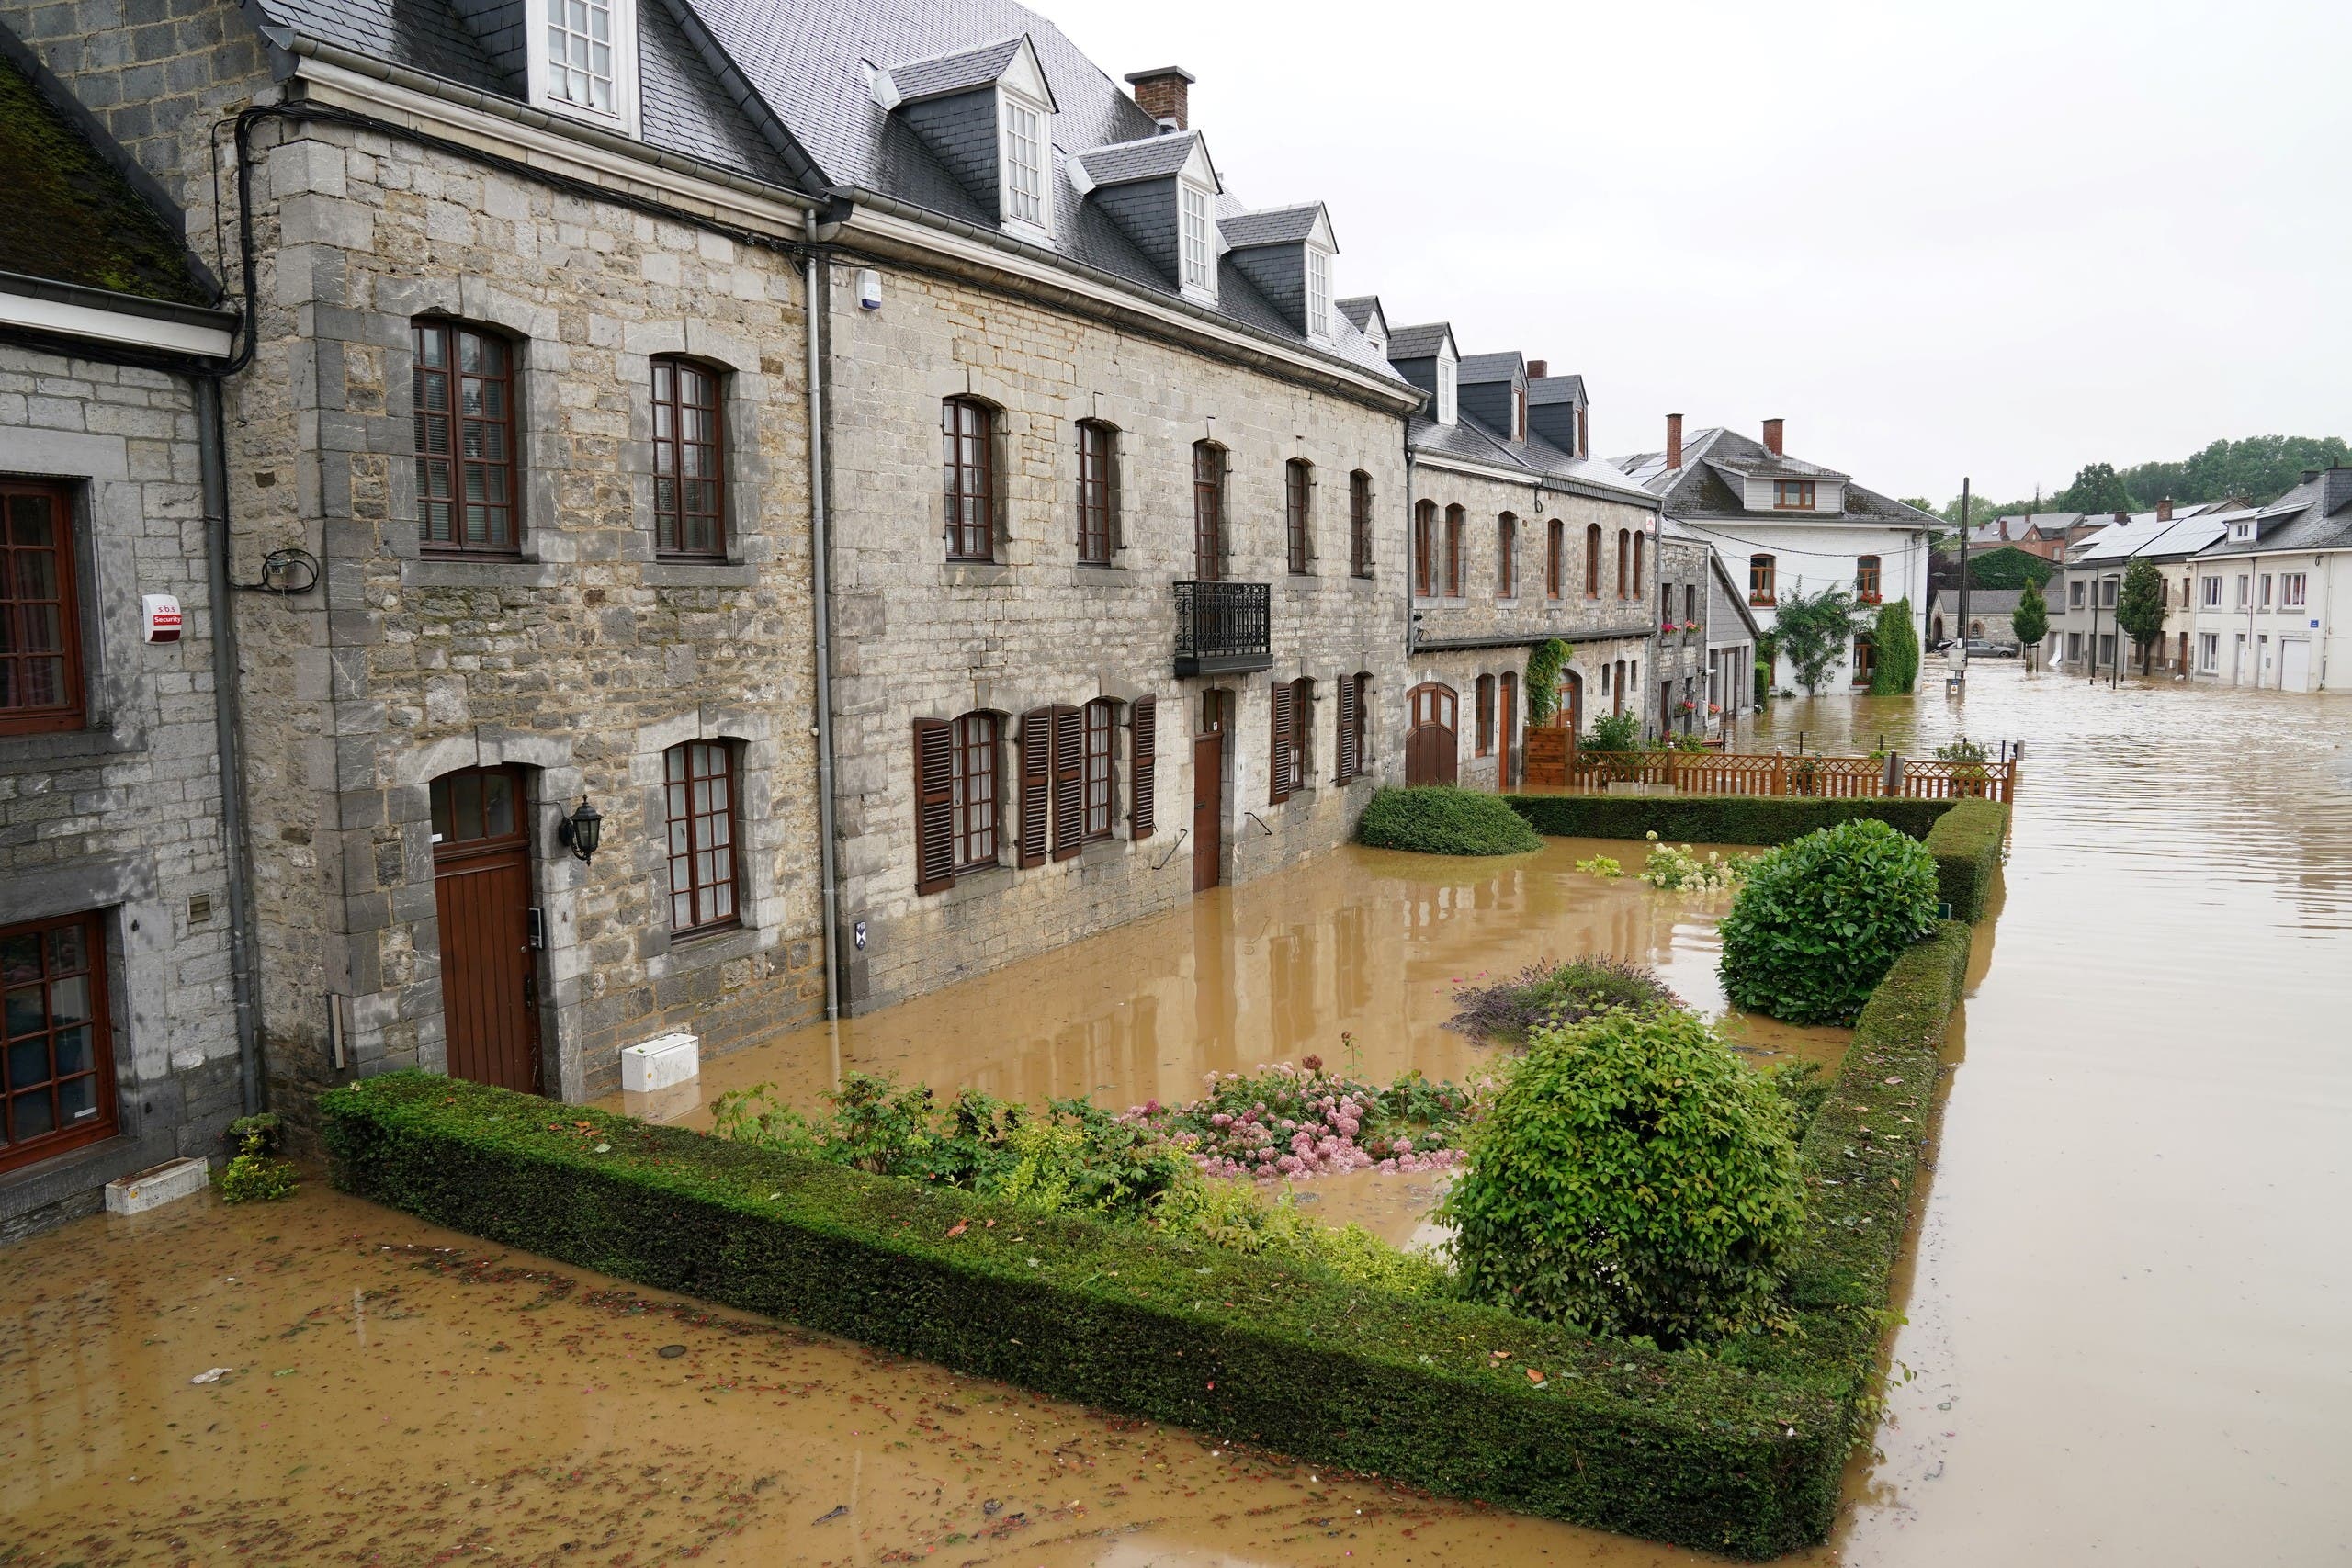 This picture shows a flooded street in Rochefort on July 15 2021 as disaster plan has been declared in Belgium's provinces of Liege, Luxembourg and Namur after heavy rains and floods lashing western Europe have killed at least two people in the country. (File photo: Reuters)